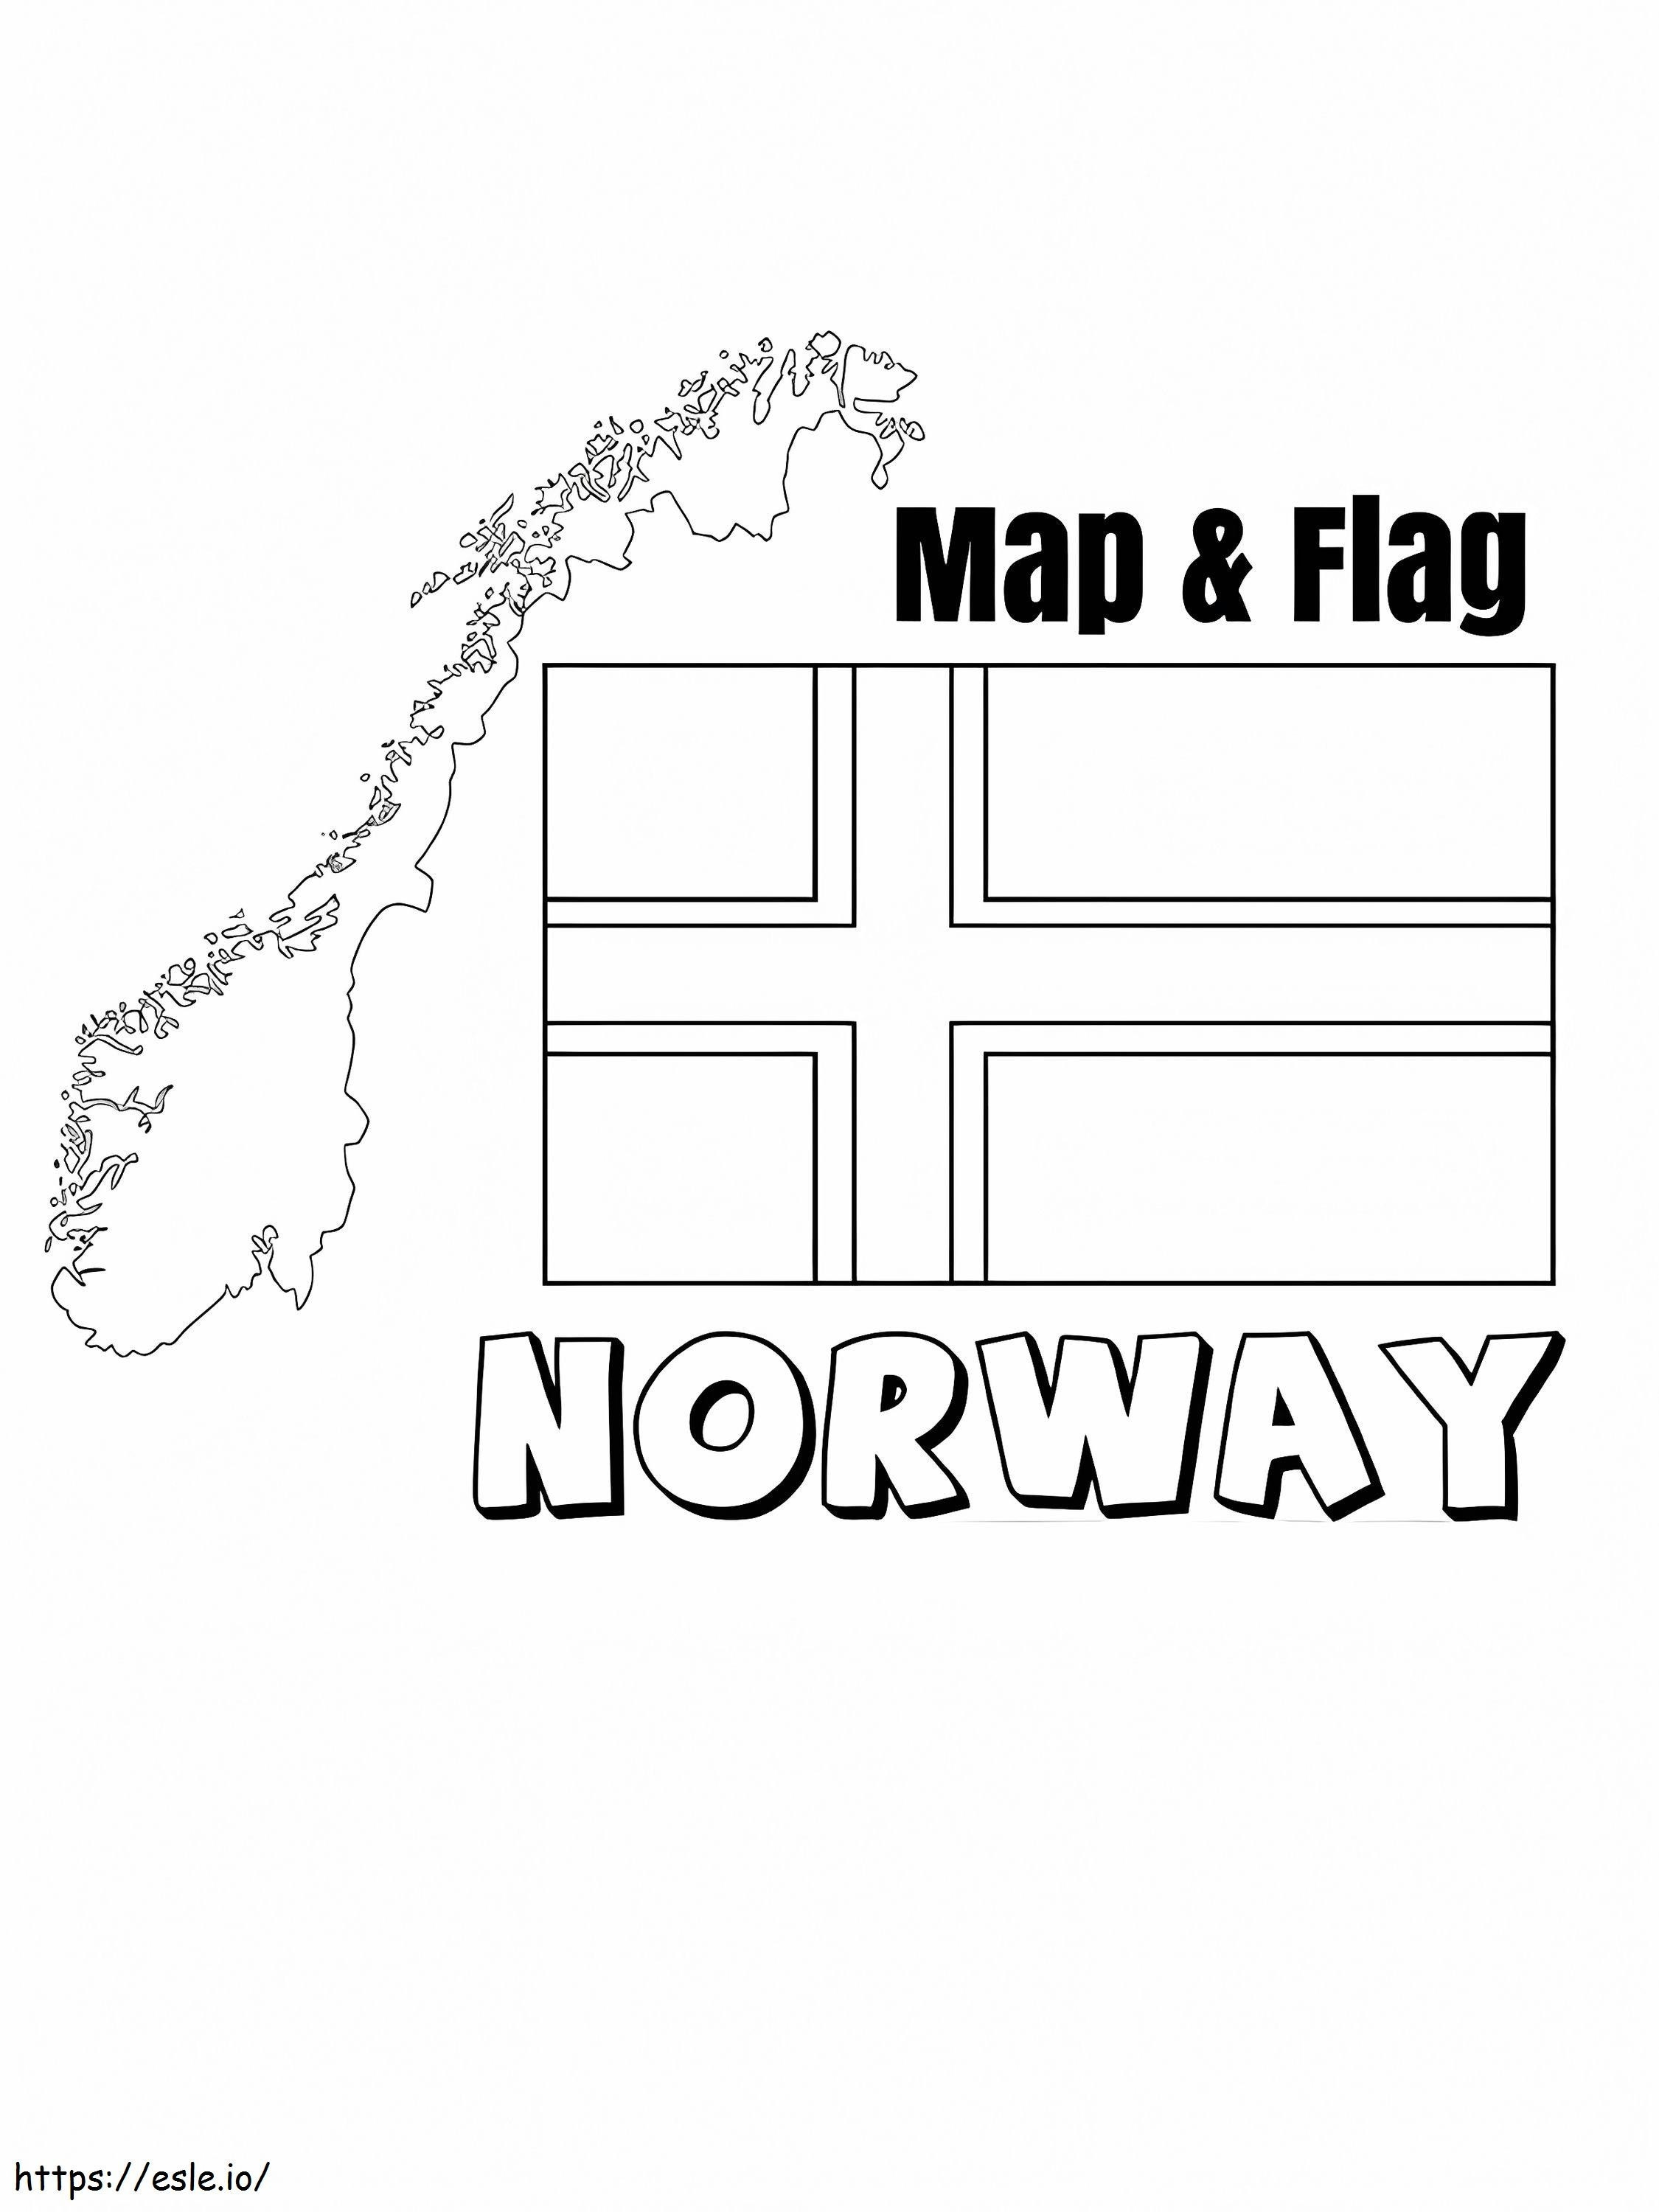 Norway Map And Flag coloring page